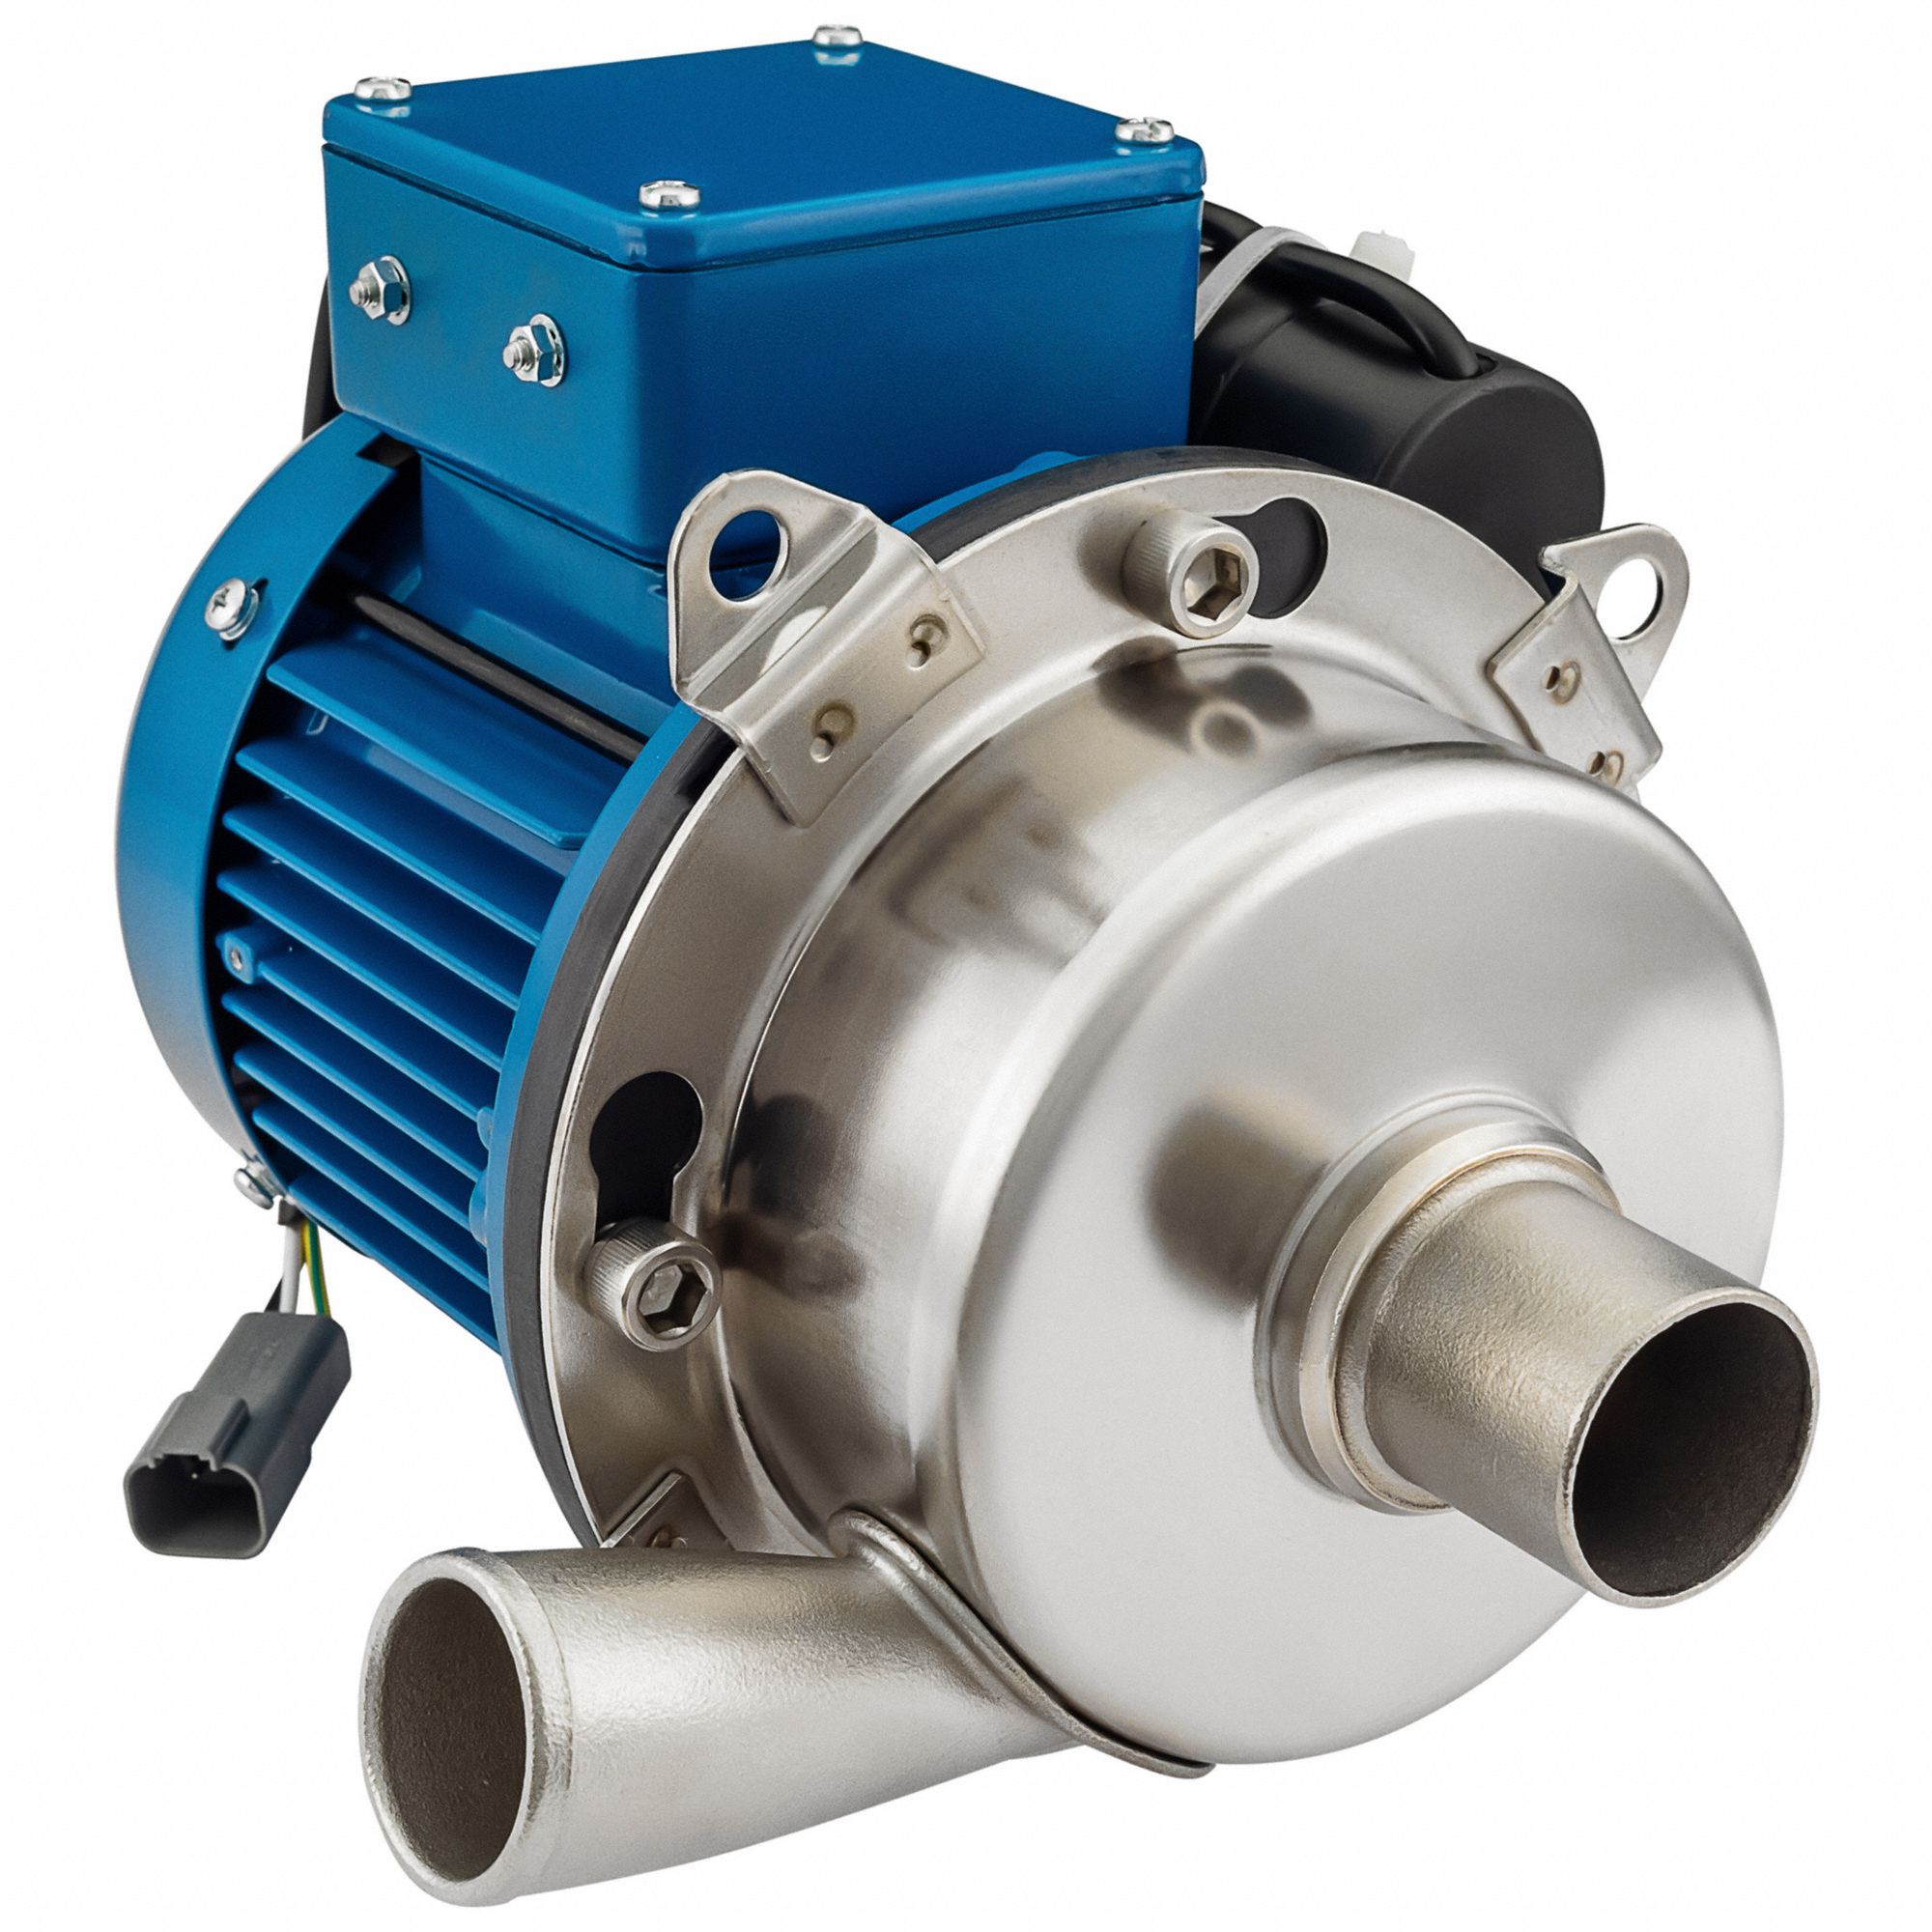 Centrifugal Pump: 1 hp, 115/230V AC, 64 ft Max Head, 1 1/2 in , 1 1/2 in Intake and Disch